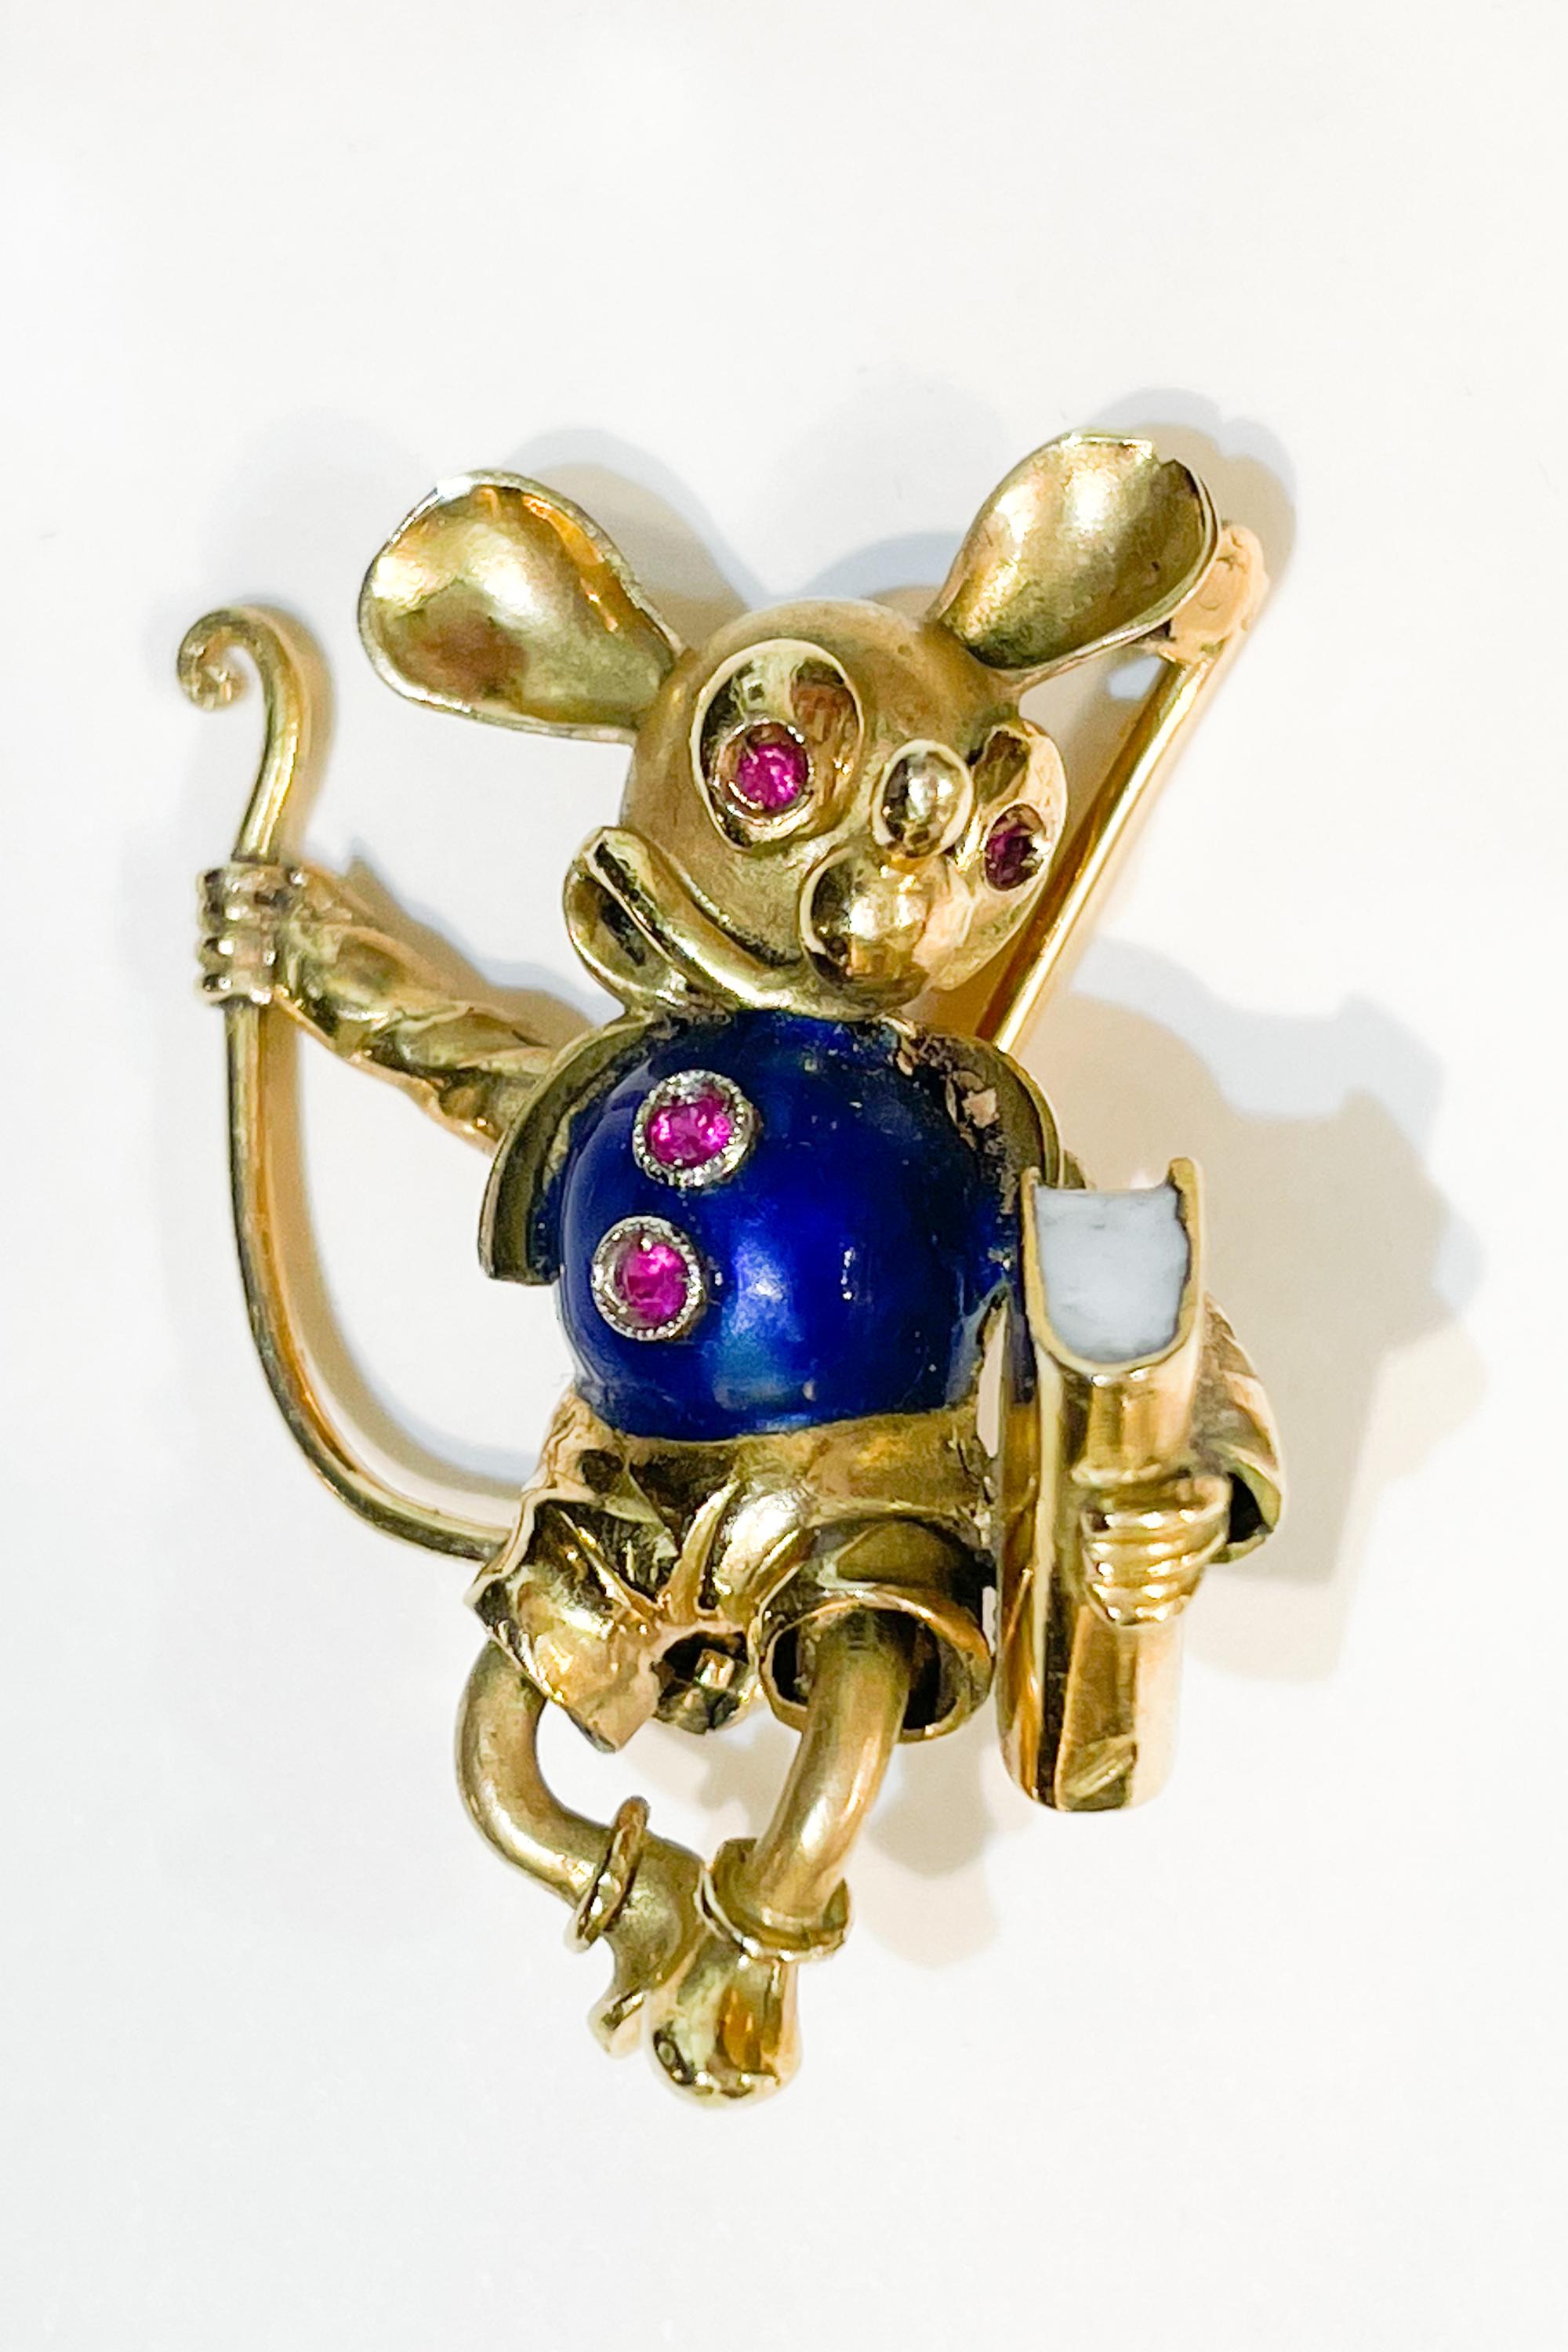 Mickey or Micky Mouse Brooch in 18 carat Yellow Gold and Enamels. - Pop Art Art by Unknown